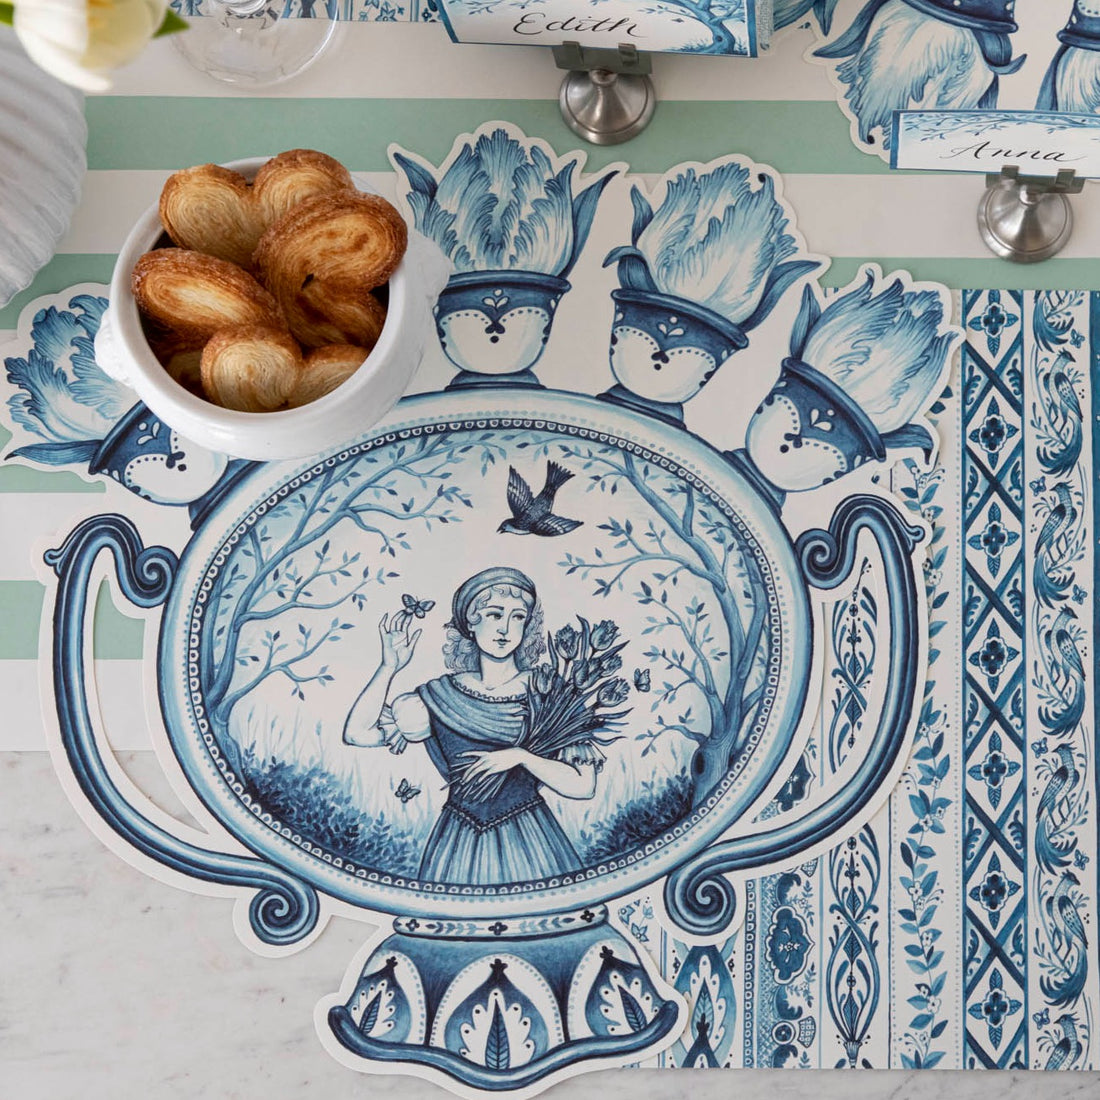 The Die-cut Indigo Meadow Placemat under an elegant place setting sans plate, from above.